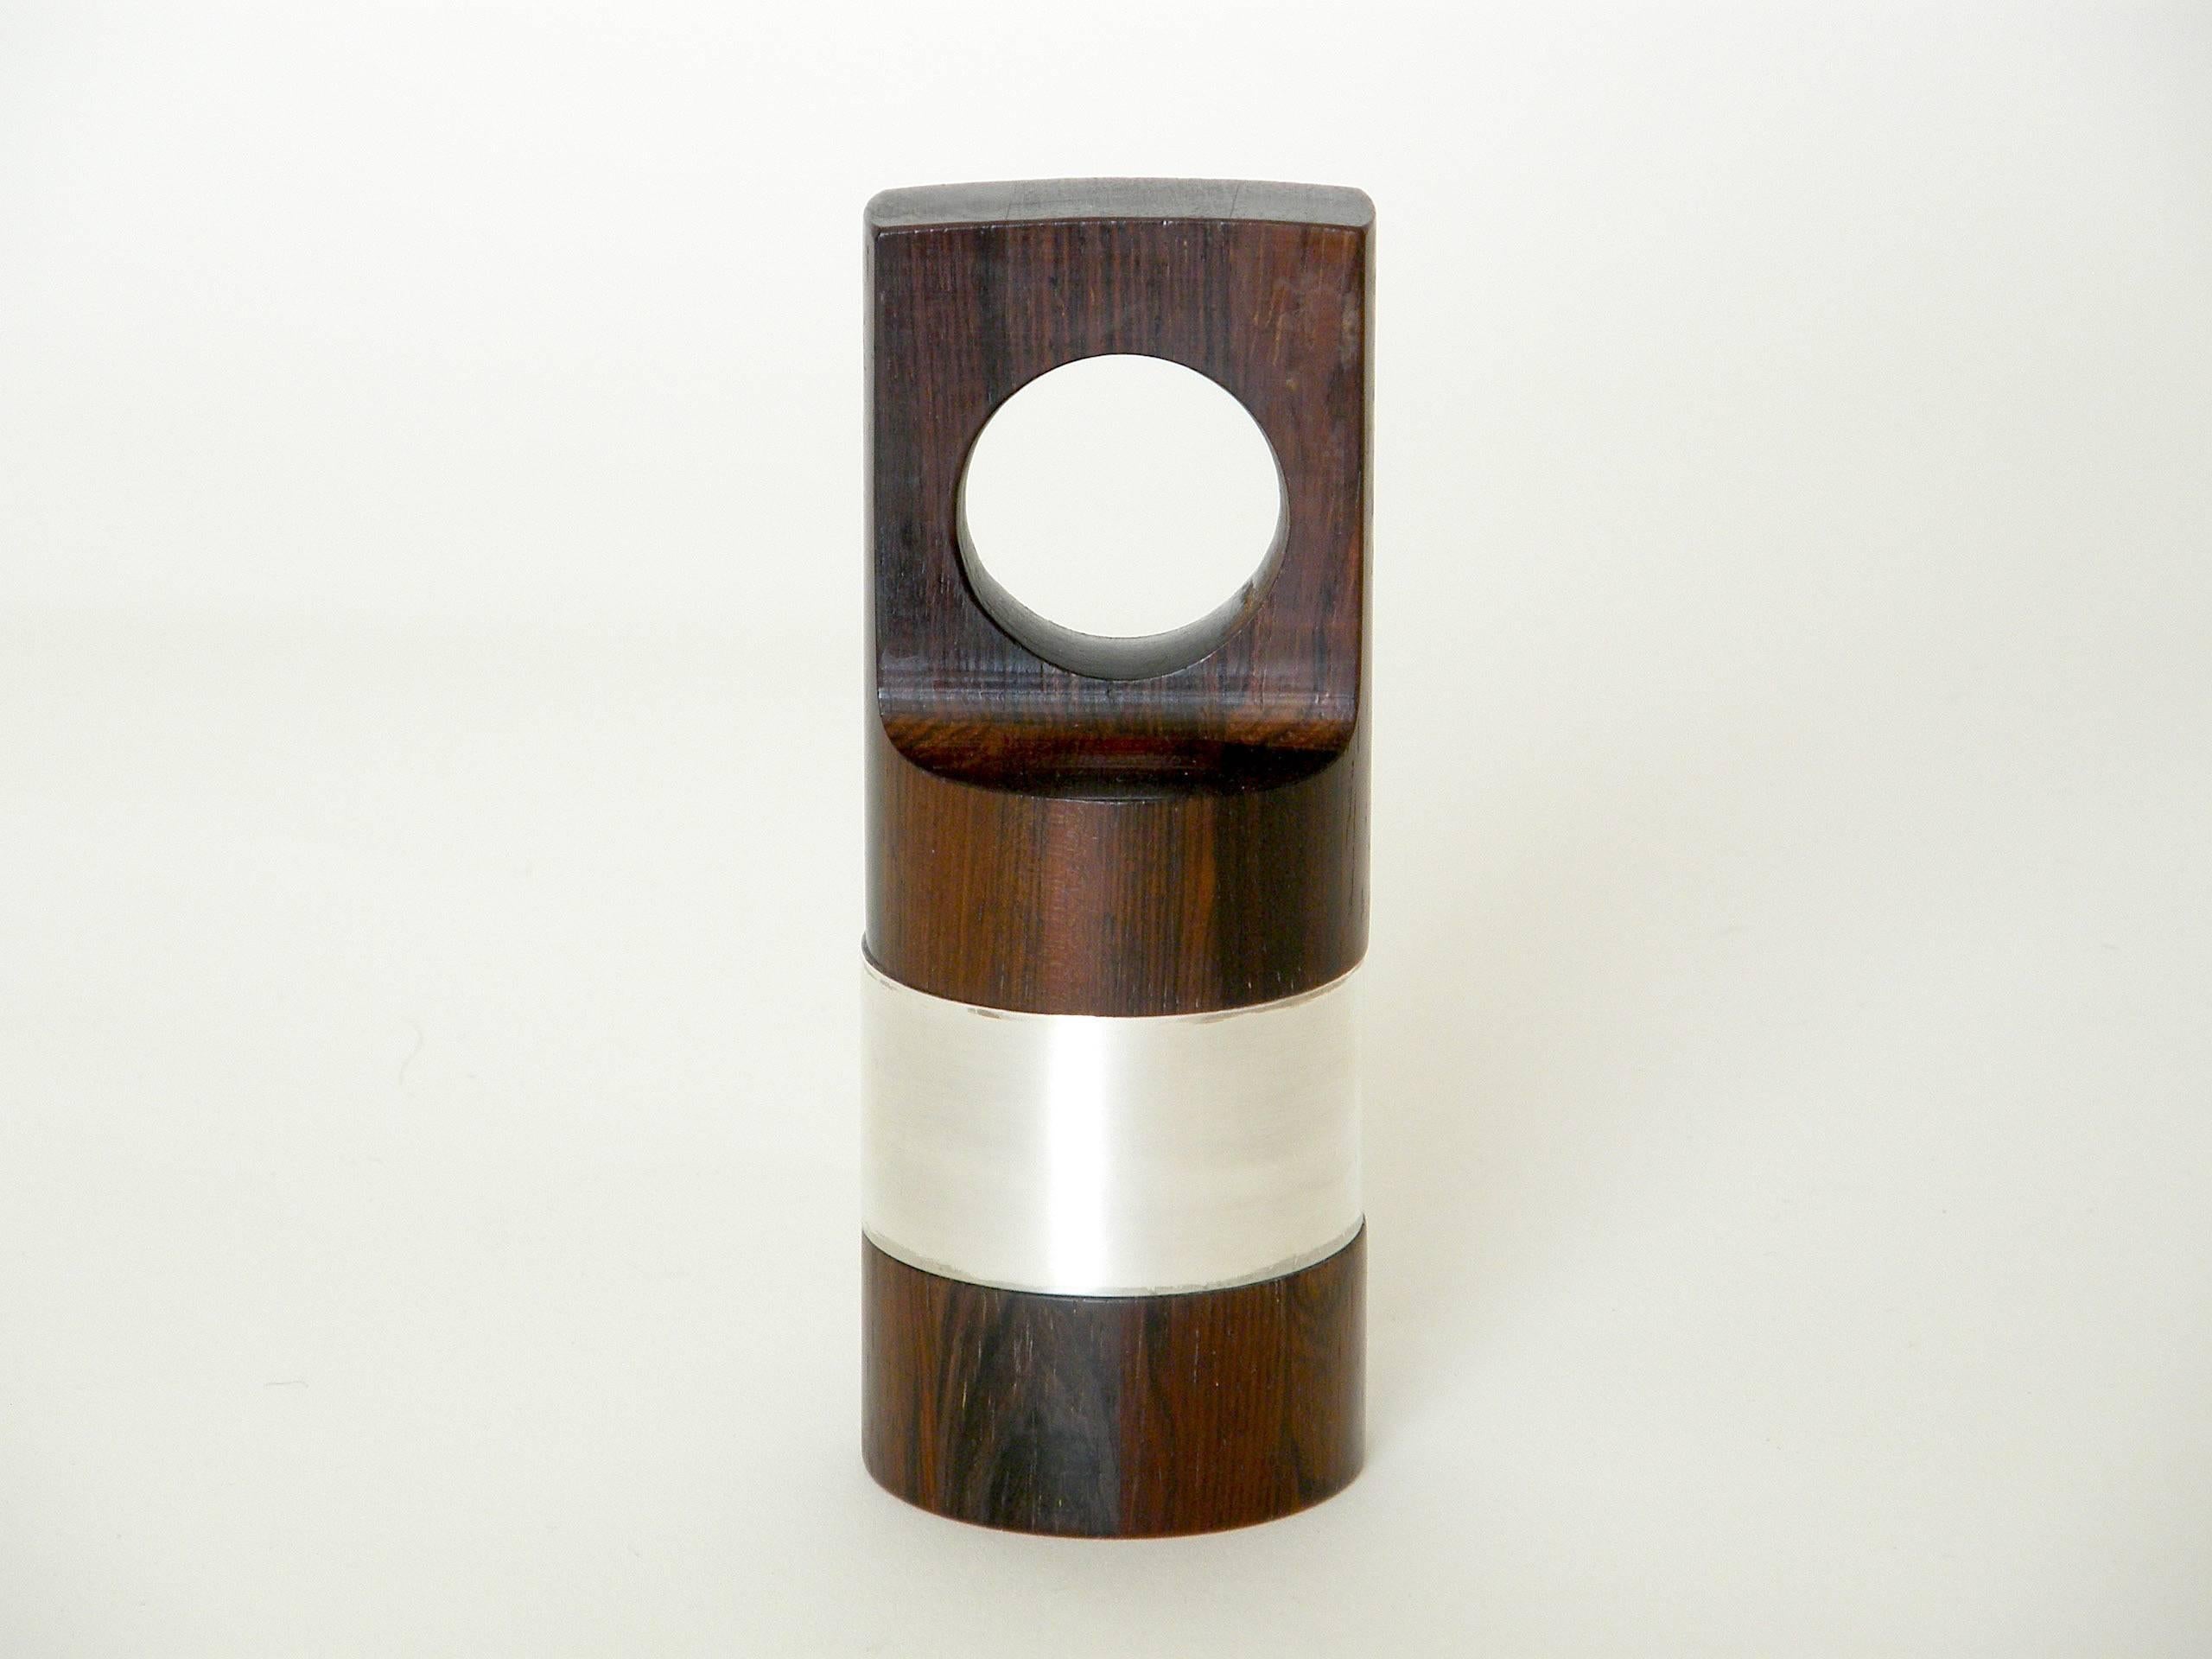 This handsome pepper mill is an uncommon example from the rare wood series design by Jens Quistgaard for Dansk Designs. The silver plated band rotates so that the hole in the wood can align with the metal hole to allow for filling with pepper corns.